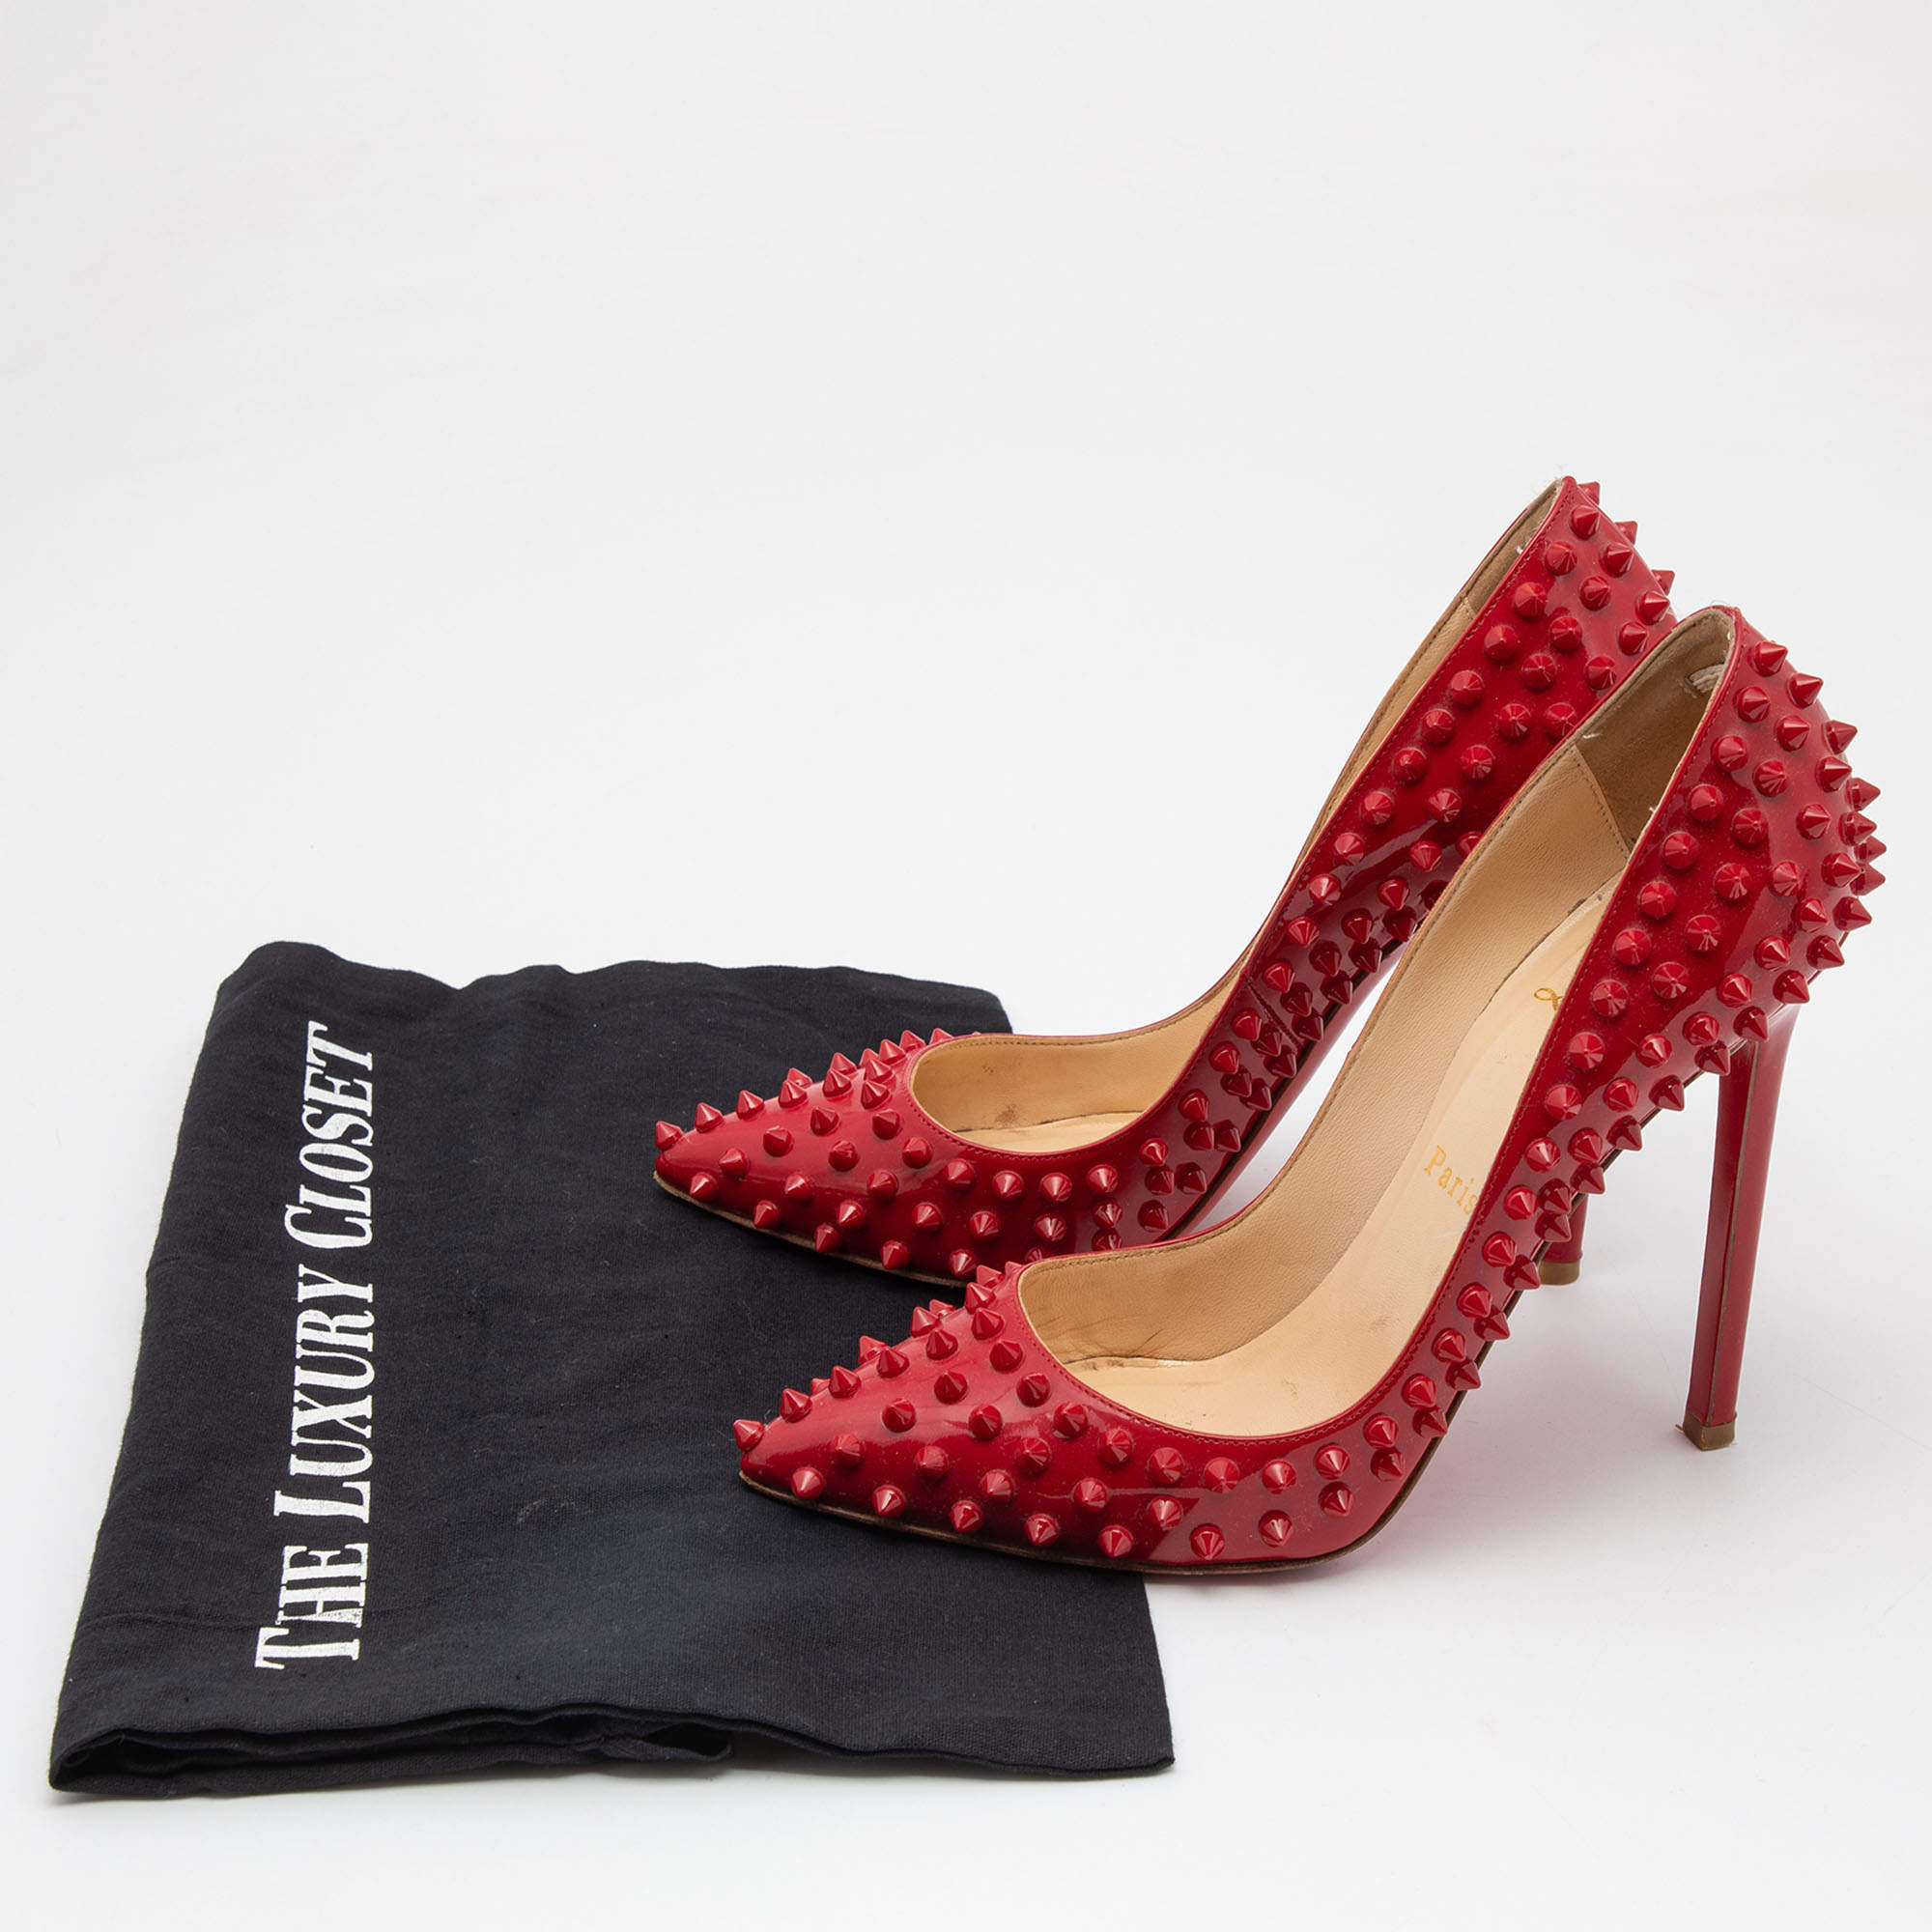 Christian Louboutin Red Patent Leather Pigalle Spike Pumps Size 37.5  Christian Louboutin